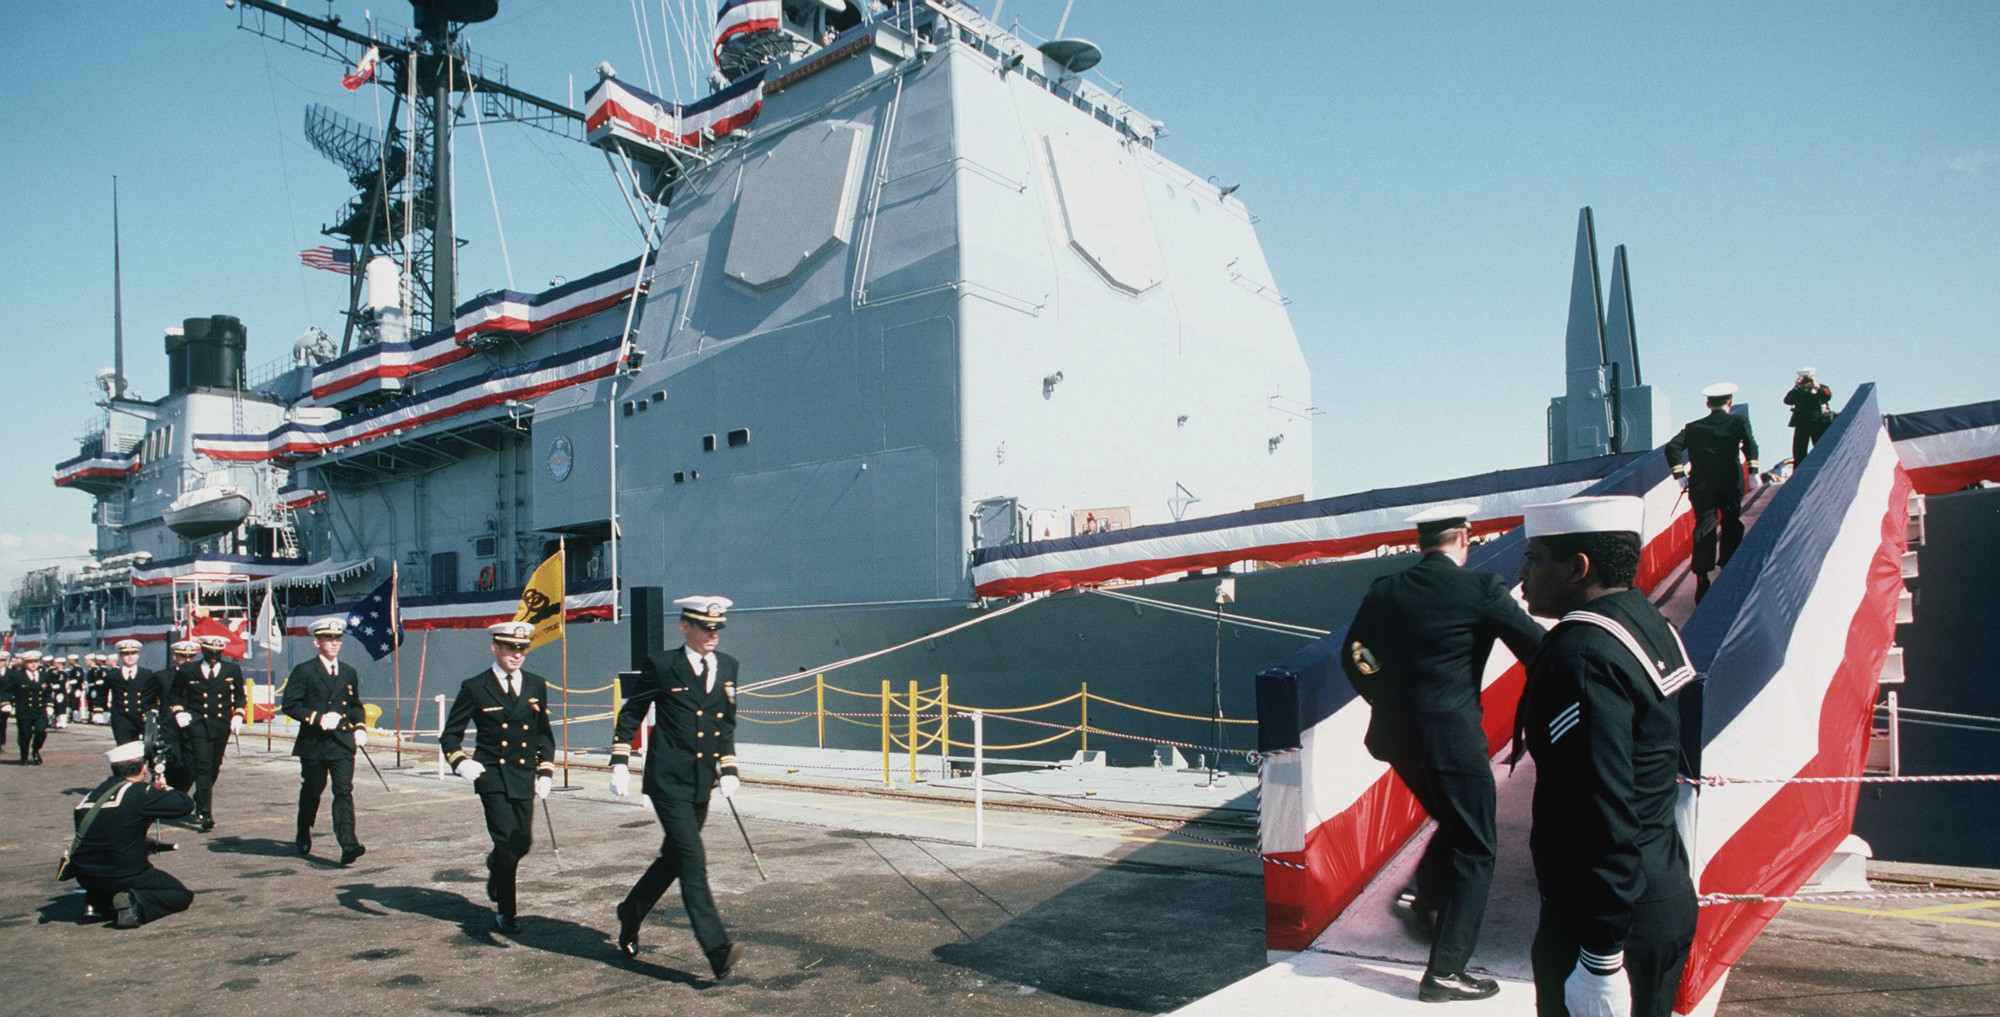 cg-50 uss valley forge ticonderoga class guided missile cruiser aegis us navy commissioning ceremony 20